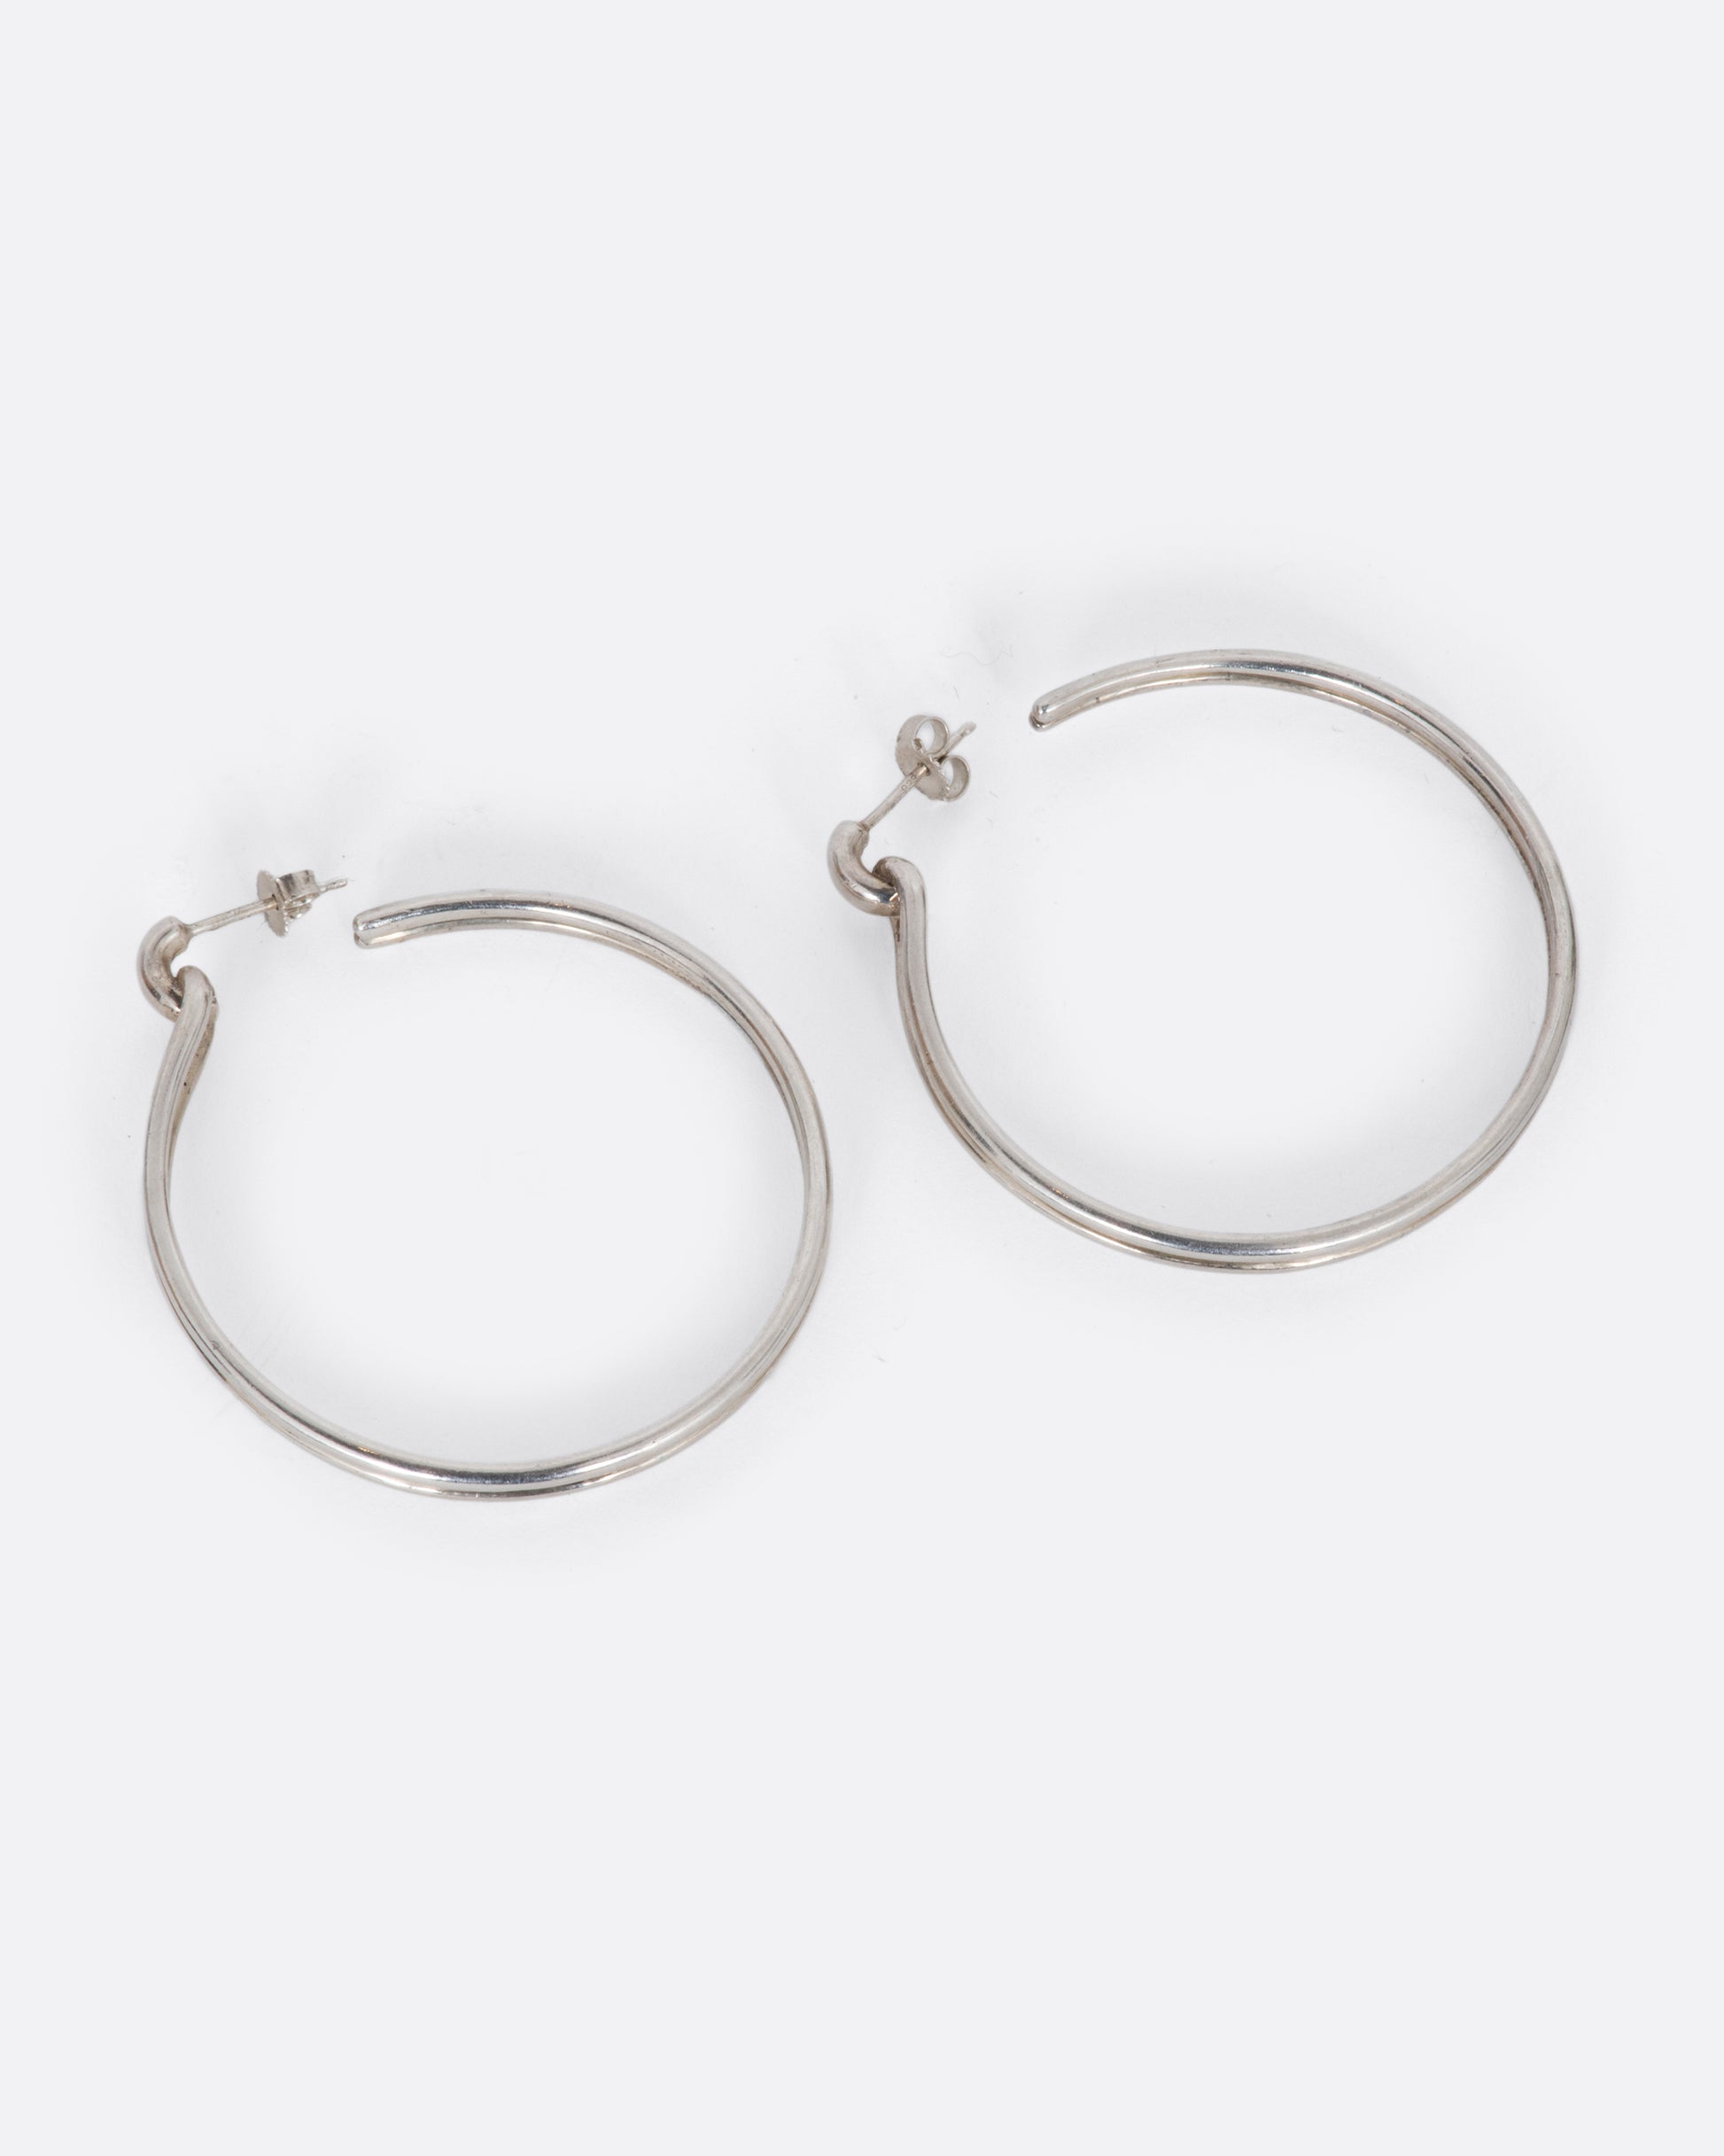 A pair of vintage sterling silver hoop earrings that connect to their posts with what looks like a loop.